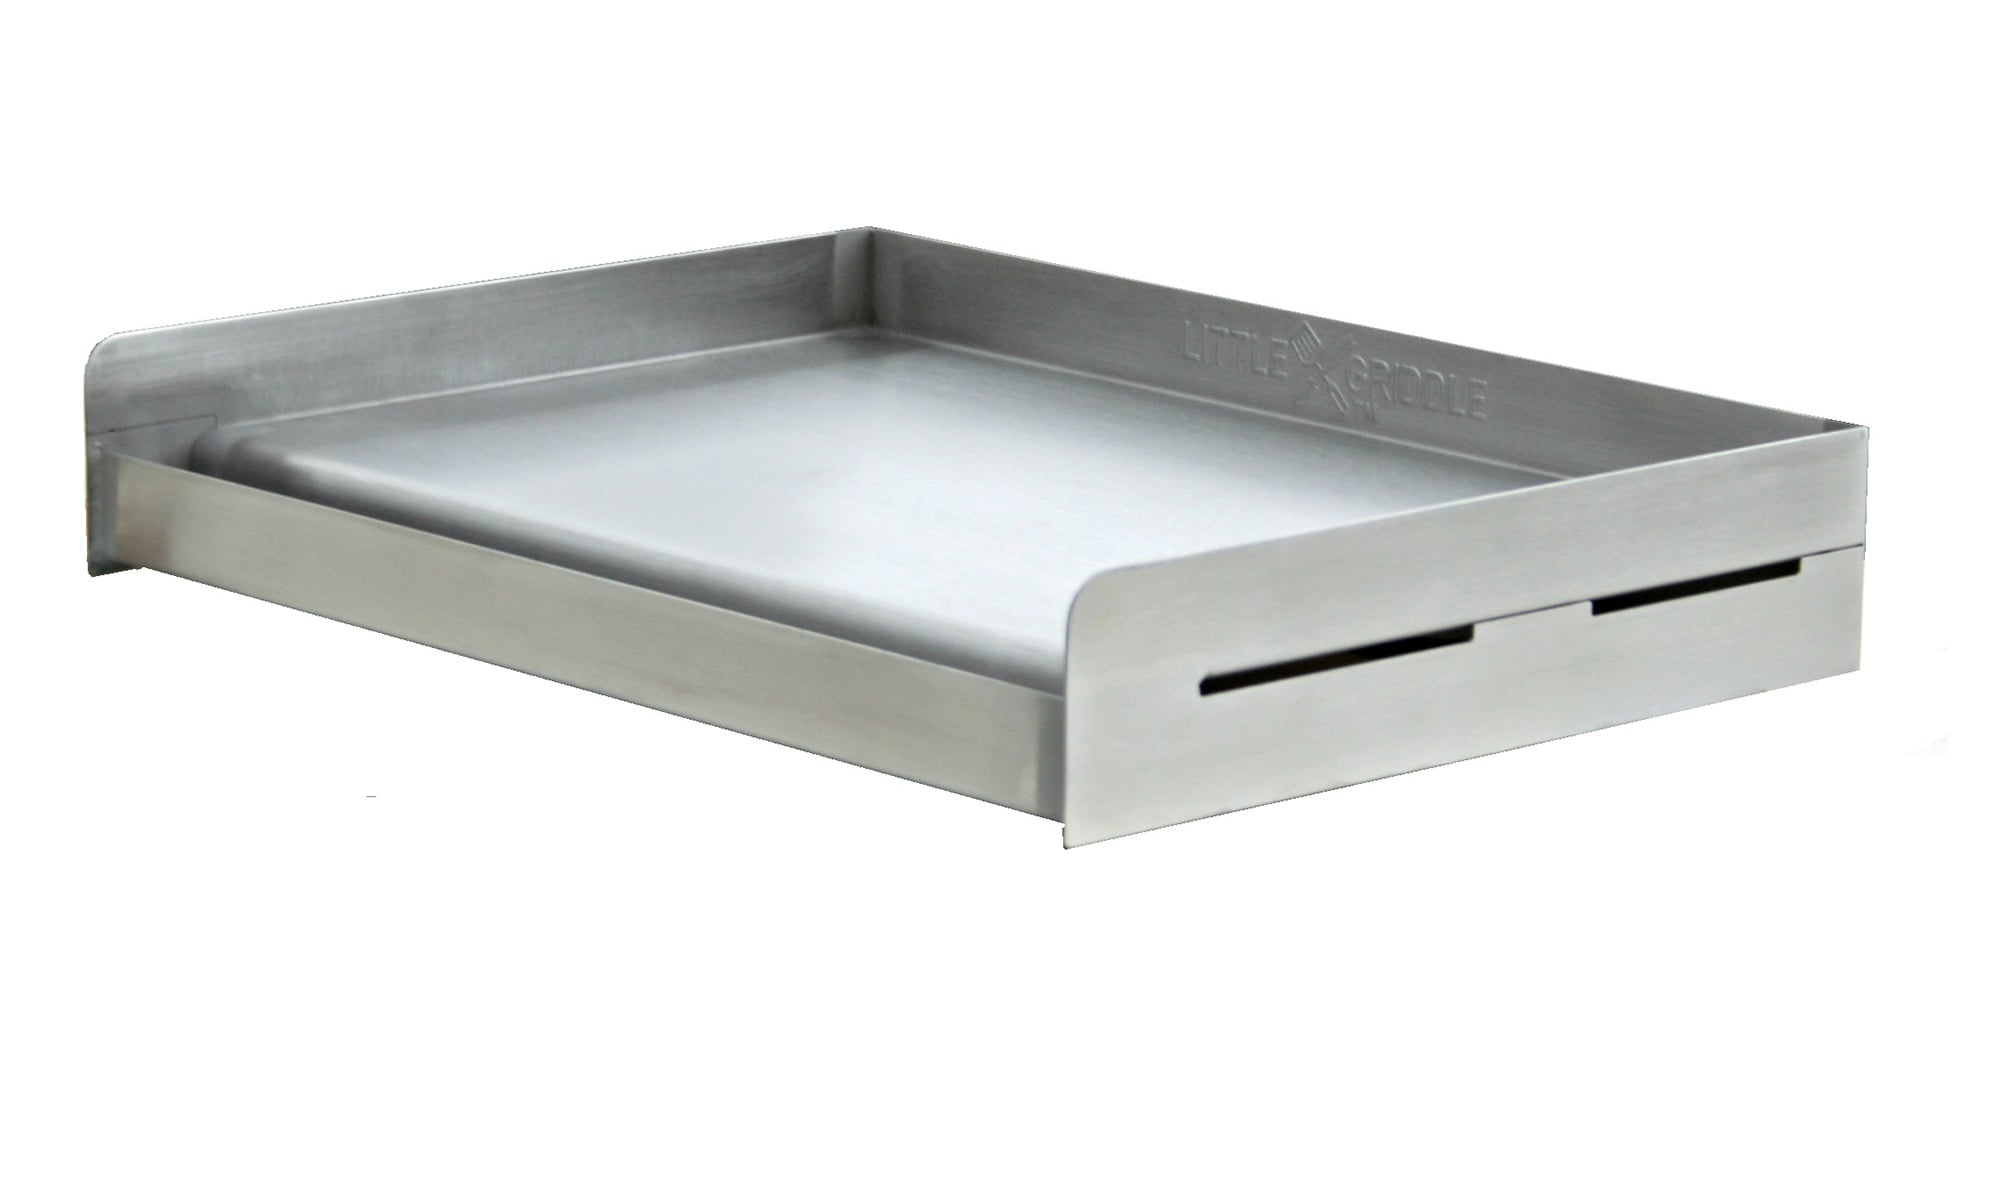 Little Griddle Sizzle-Q Stainless Steel Universal BBQ Griddle